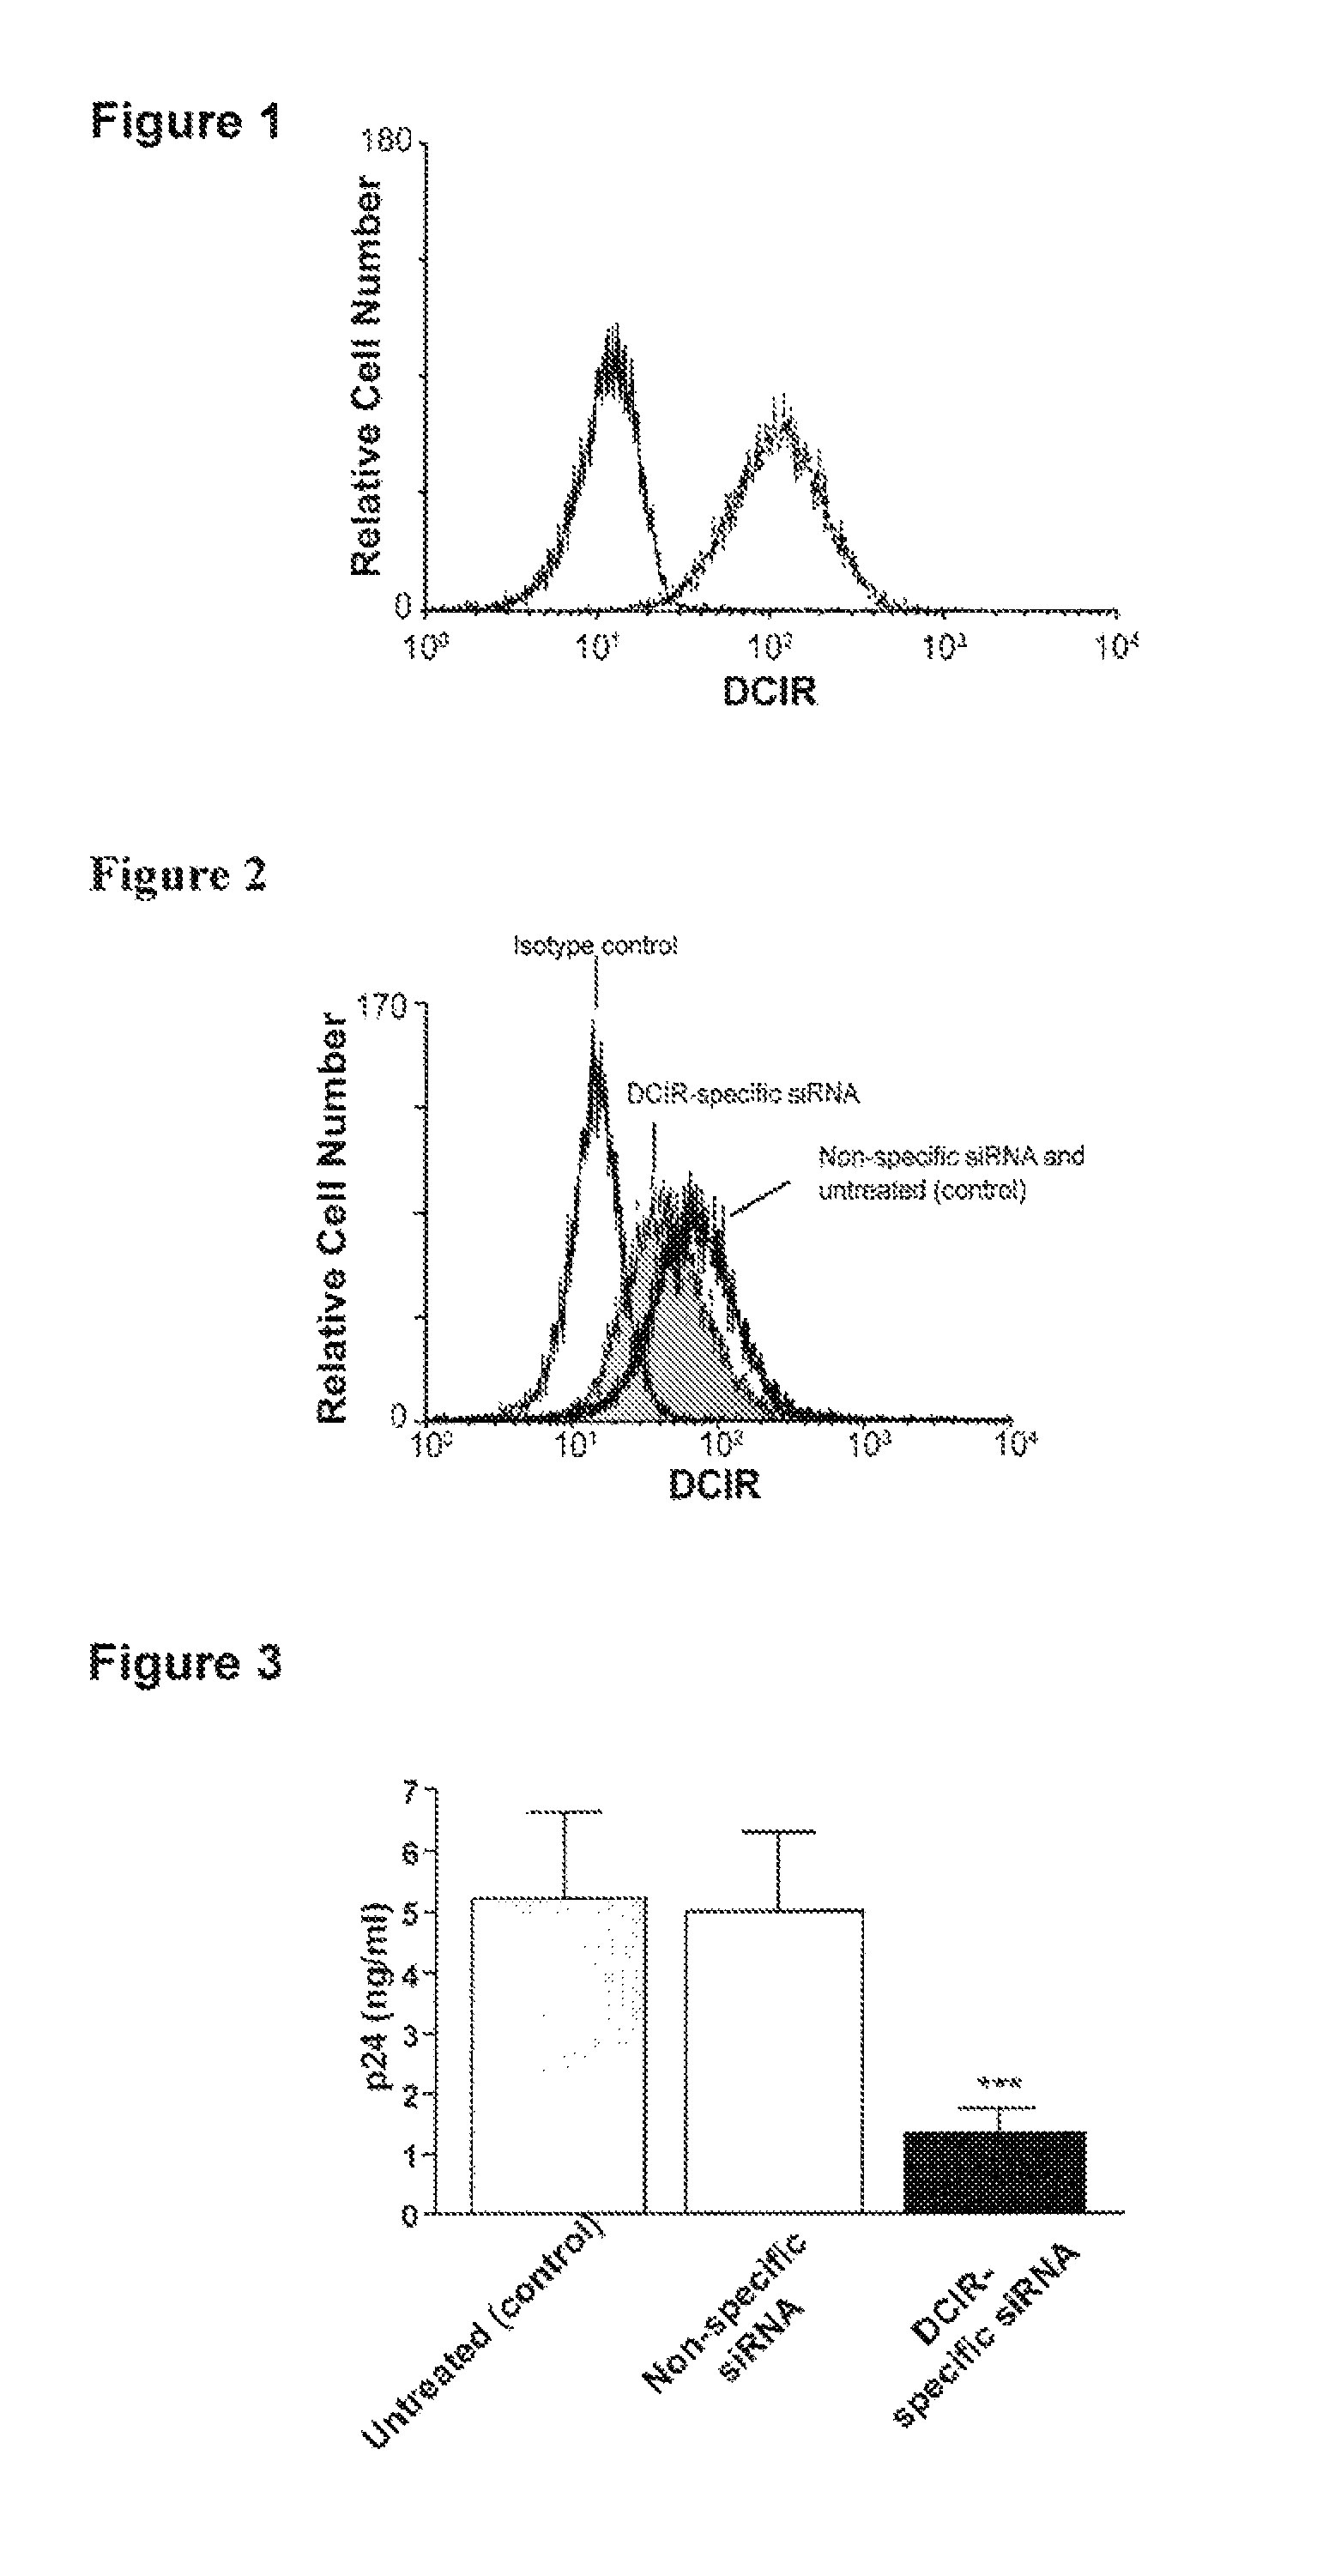 Method for inhibiting dendritic cell immunoreceptor (DCIR)-mediated human immunodeficiency virus infection comprising administering anti-DCIR antibodies